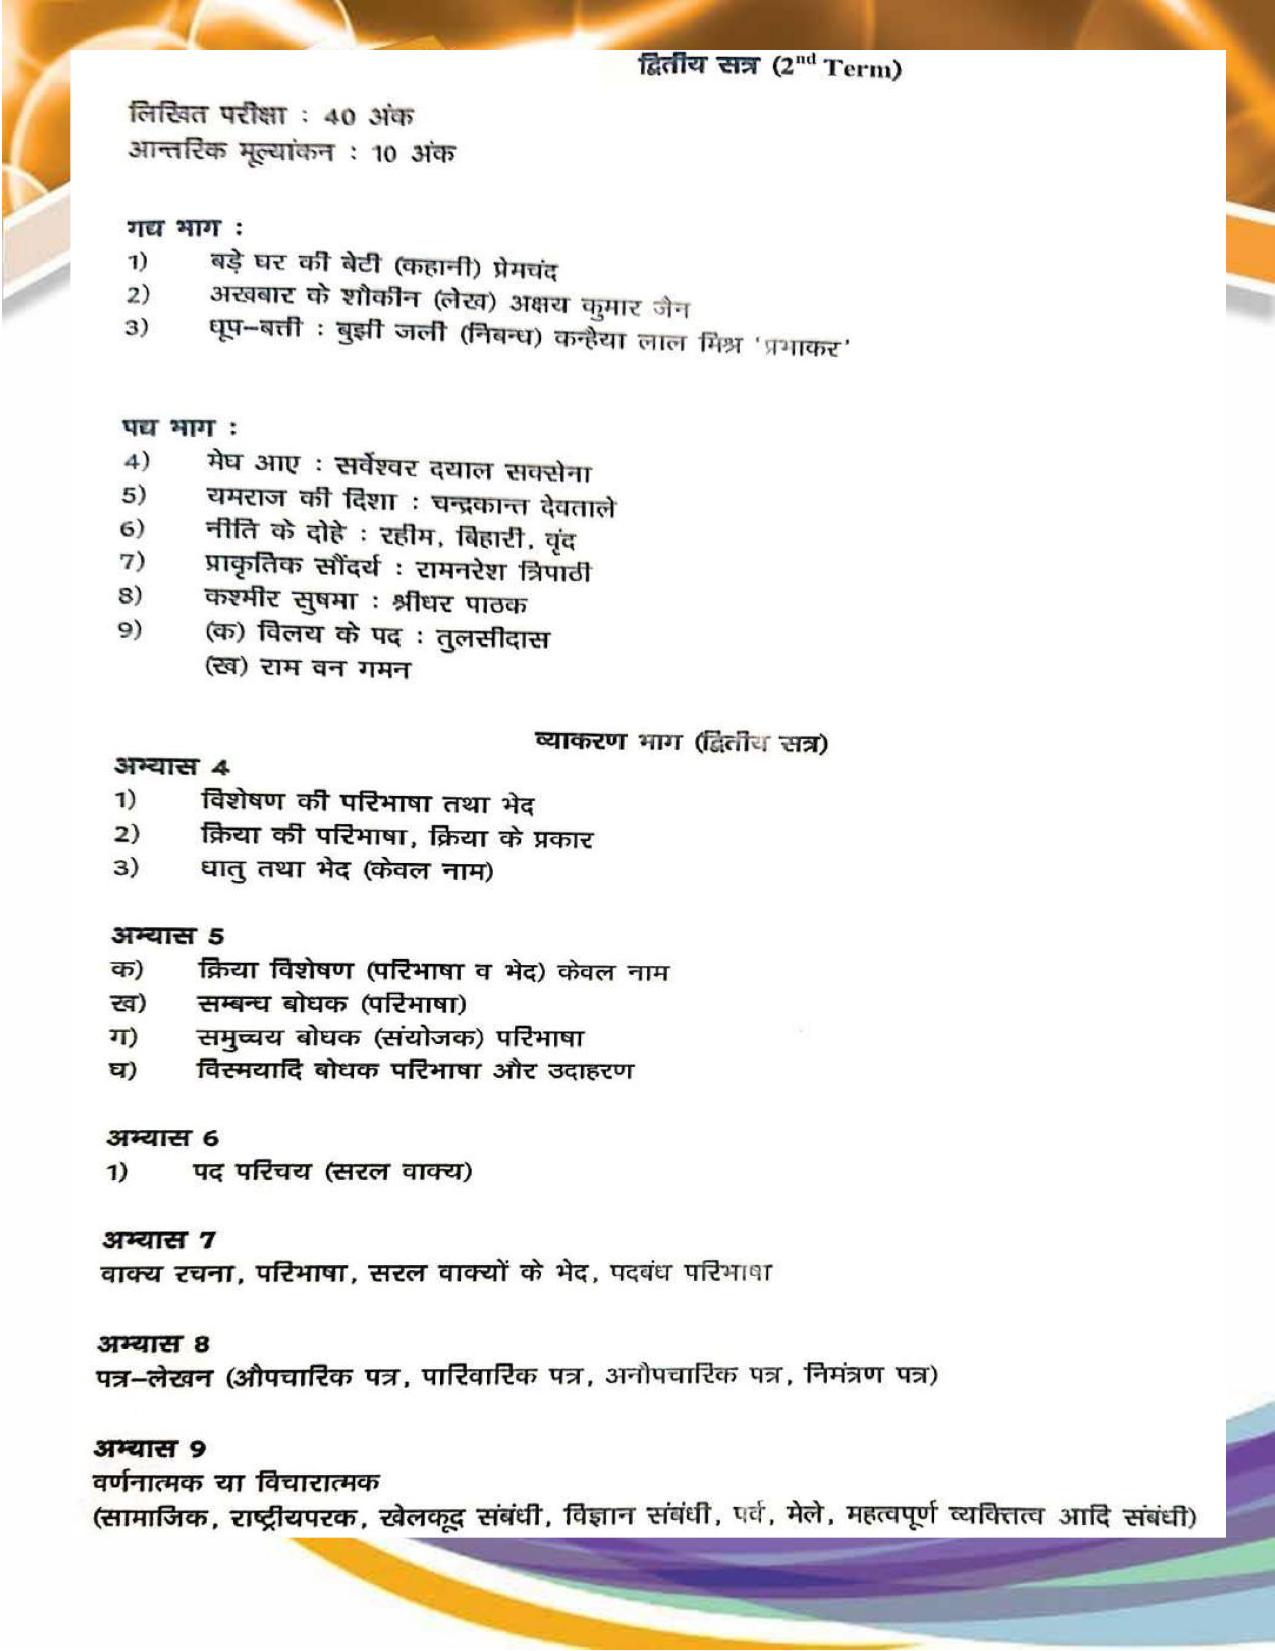 JKBOSE Syllabus for 9th class - Page 19